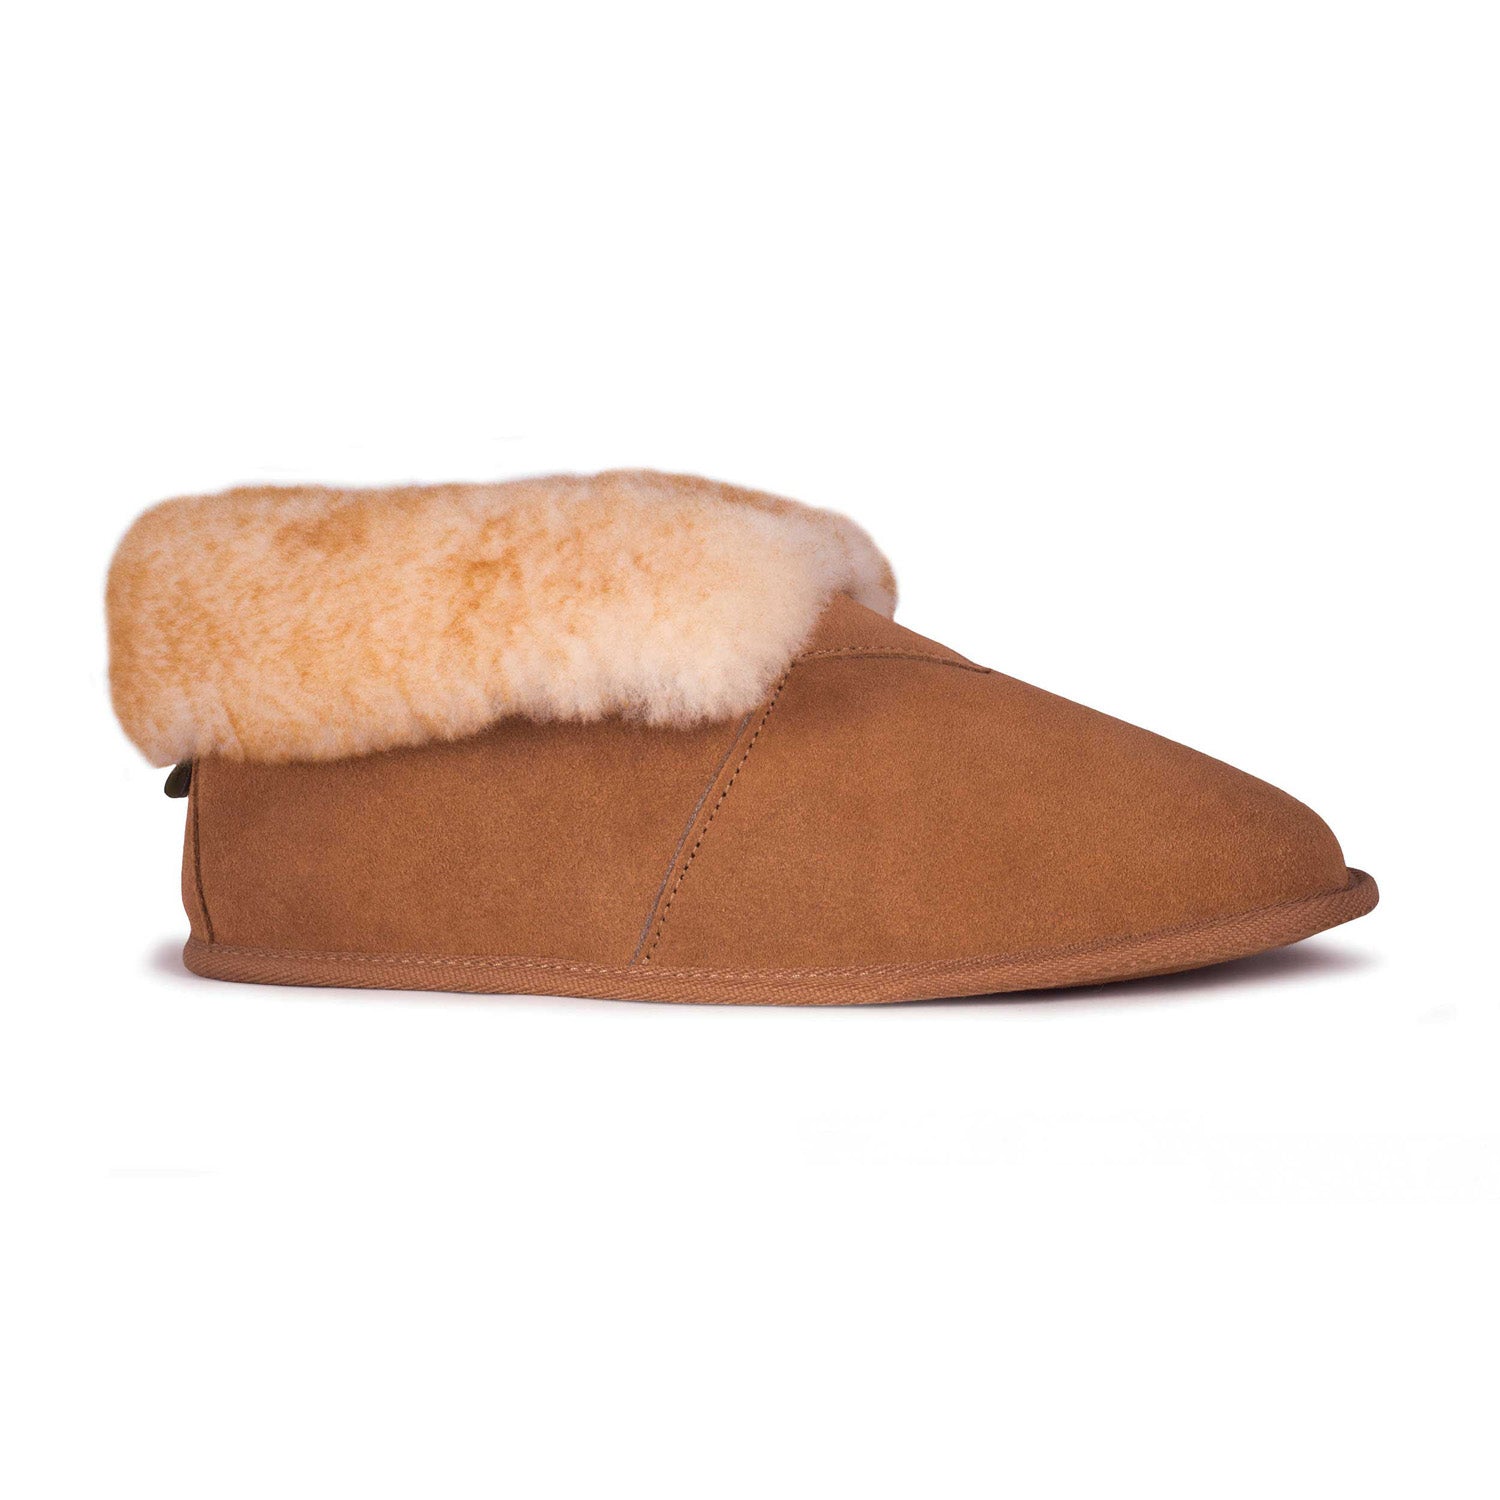 Men's Sheepskin Slippers with Soft Sole, Shearling Lined Leather House  Slippers for Men Women, Slip-On Shoes, Indoor Shoes, Warm Soft for Winter,  skin-coloured, 41 EU : Amazon.de: Fashion